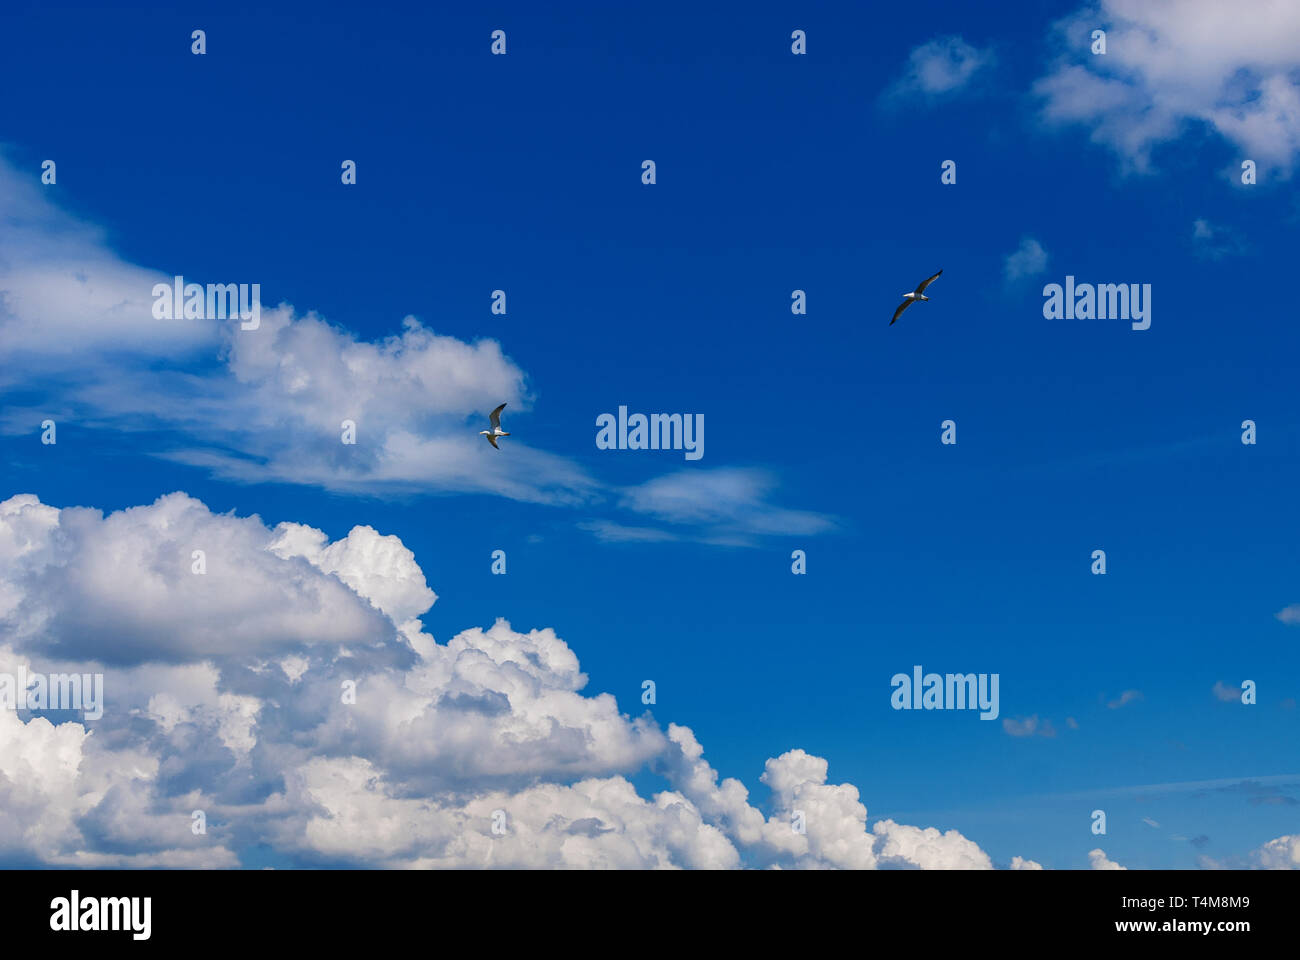 Two seagulls flying in a beautiful blue sky with white clouds as background Stock Photo